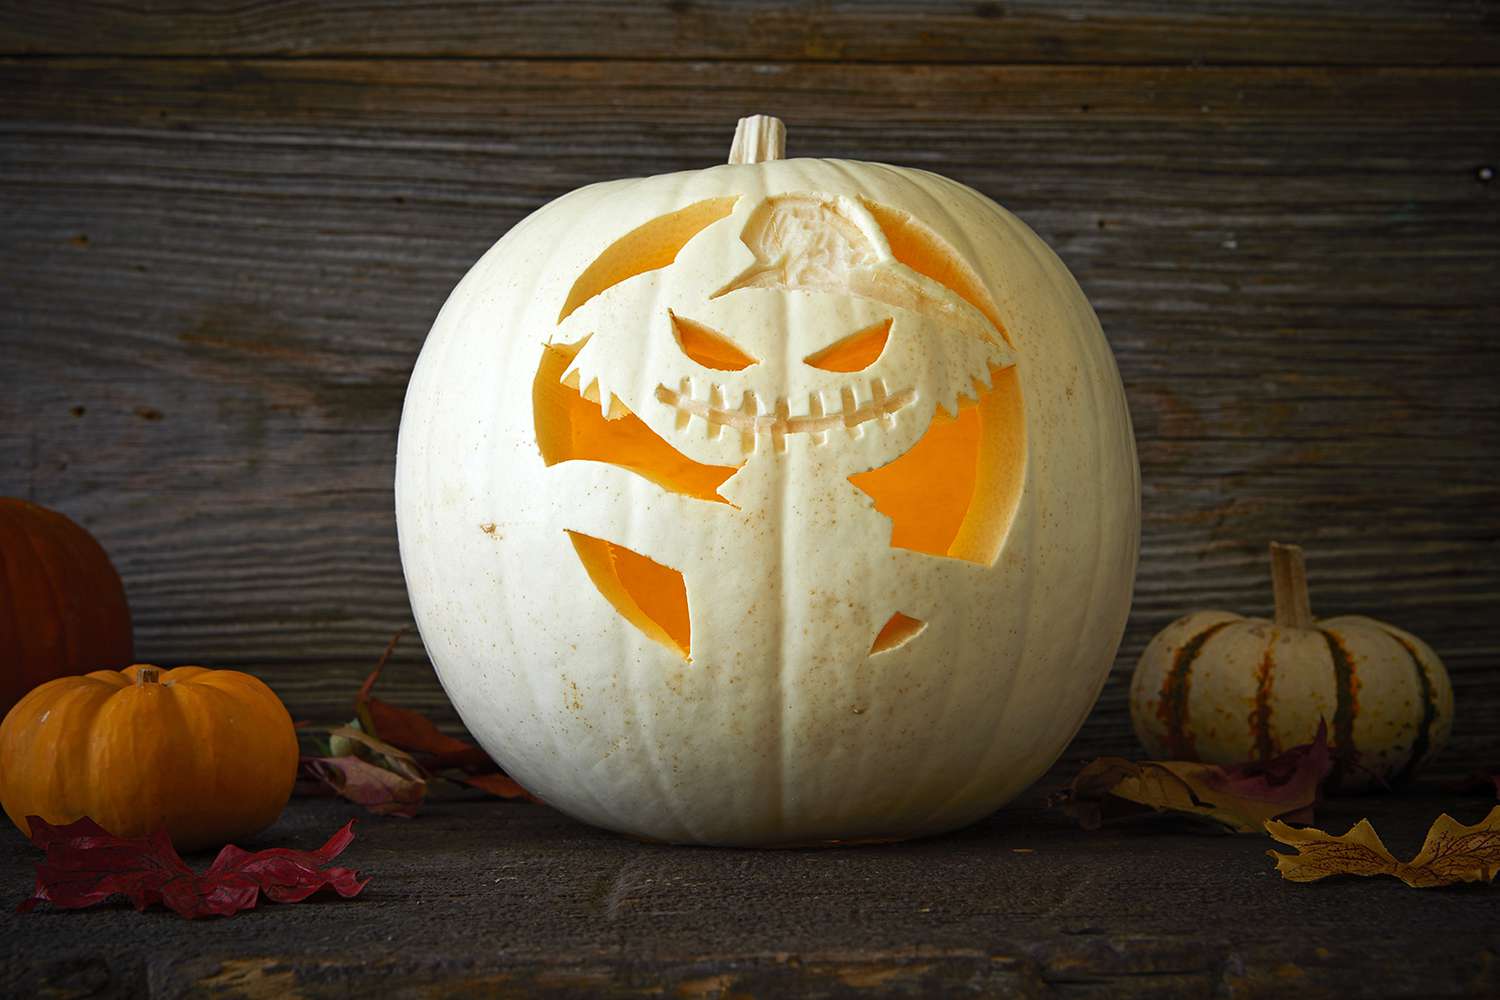 gremlin with hat carved into pumpkin